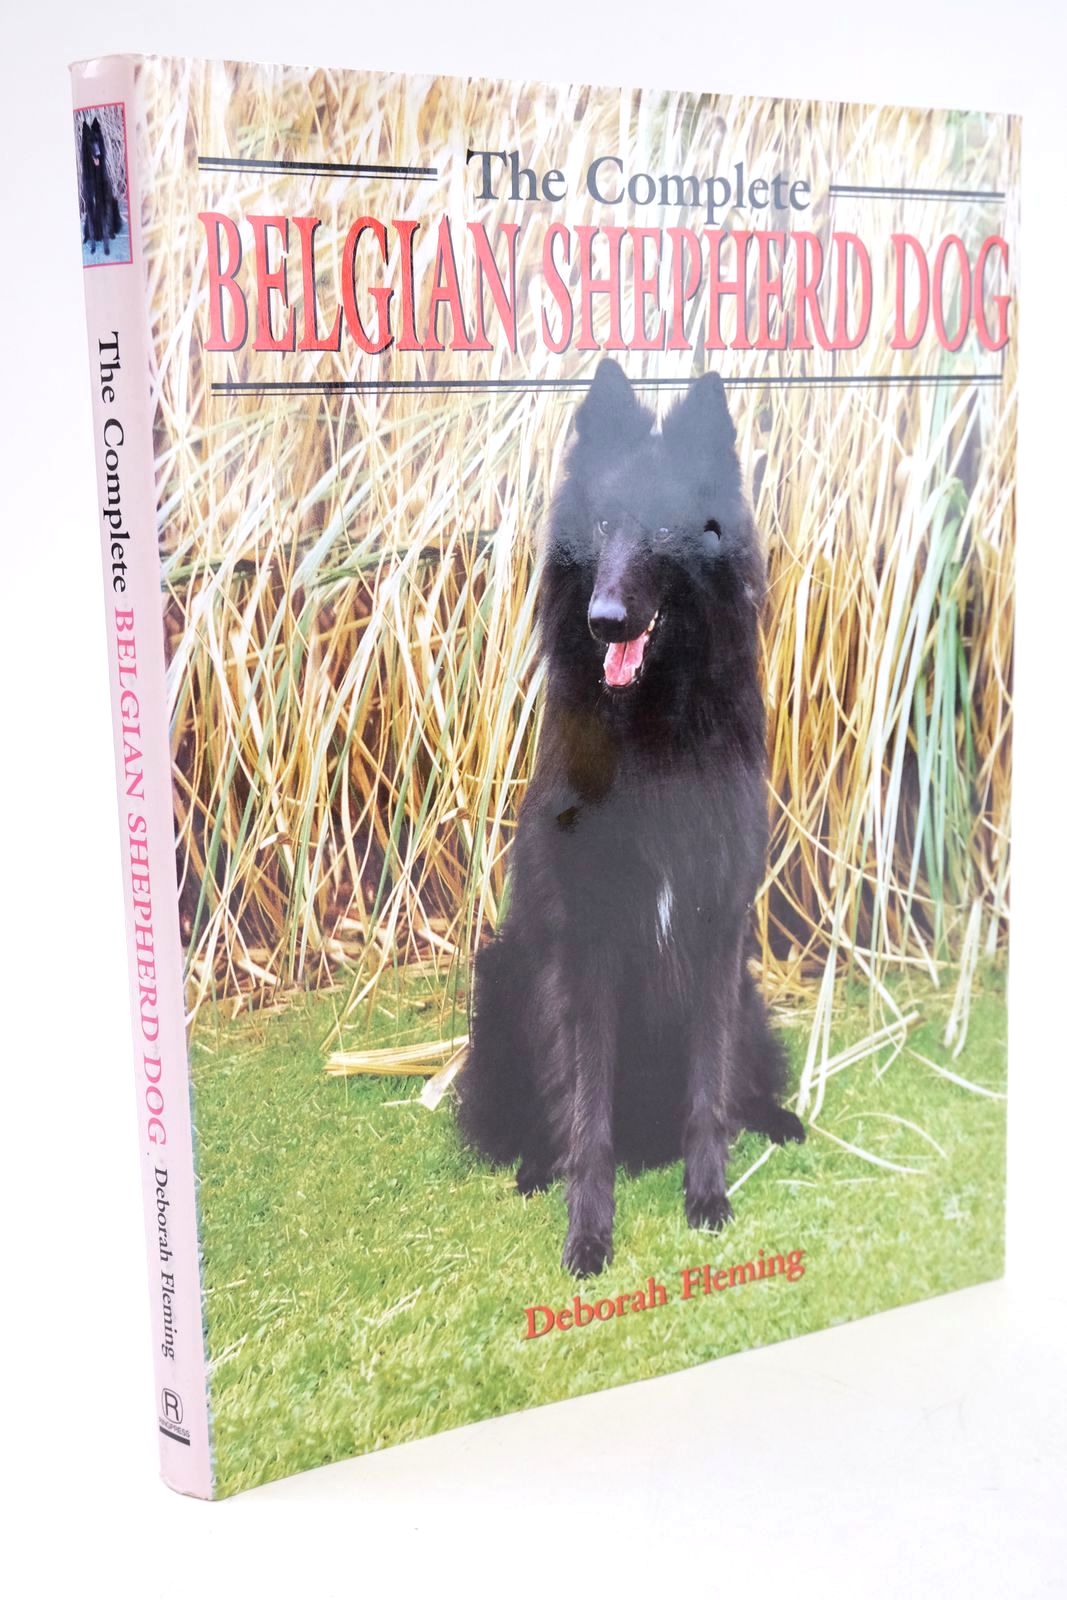 Photo of THE COMPLETE BELGIAN SHEPHERD DOG written by Fleming, Deborah published by Ringpress Books (STOCK CODE: 1324933)  for sale by Stella & Rose's Books